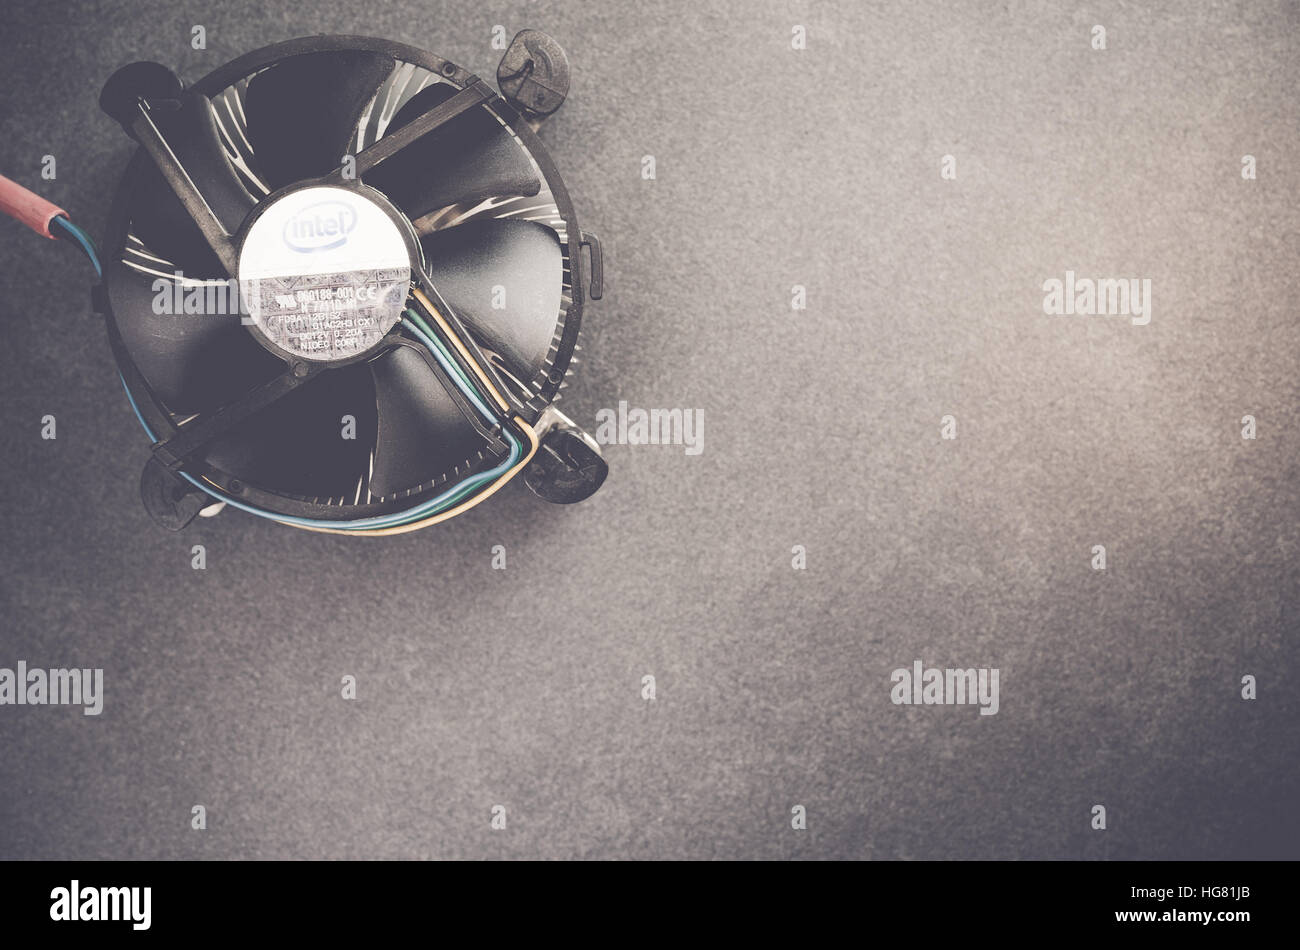 Intel cpu fan assembly cooler top view - slate background Stock Photo